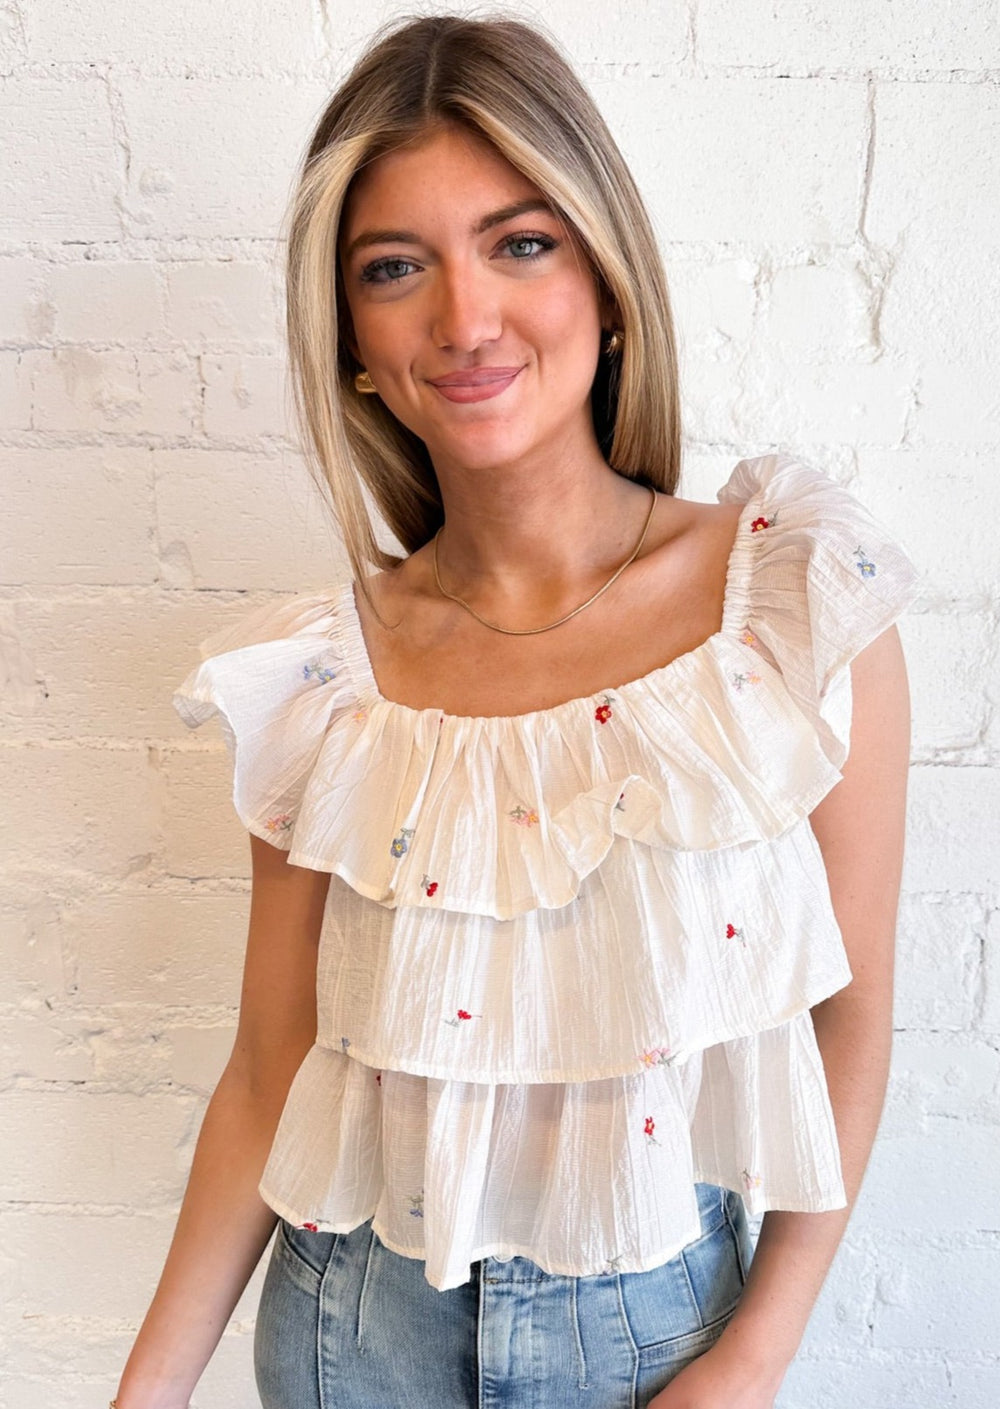 Floral Embroidered Top, Tops, Adeline, Adeline, dallas boutique, dallas texas, texas boutique, women's boutique dallas, adeline boutique, dallas boutique, trendy boutique, affordable boutique